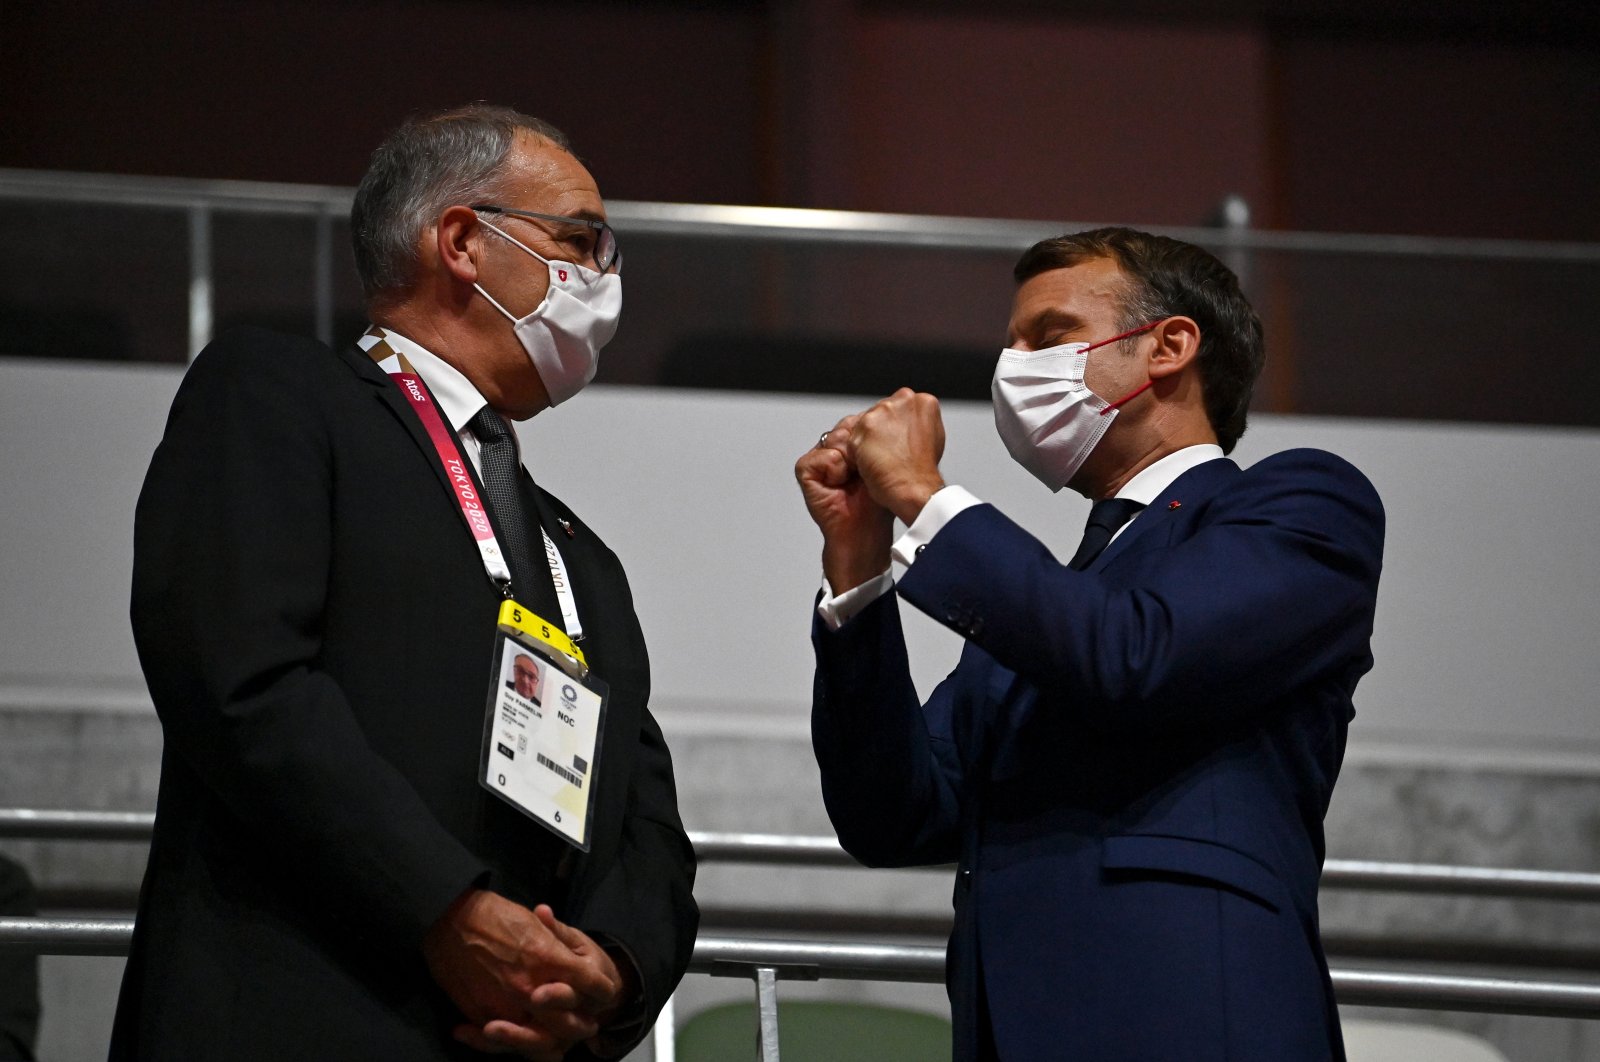 President of Switzerland Guy Parmelin and President of France Emmanuel Macron are seen prior to the Opening Ceremony of the Tokyo 2020 Olympic Games at the Olympic Stadium on July 23, 2021, Tokyo, Japan. (Getty Images)